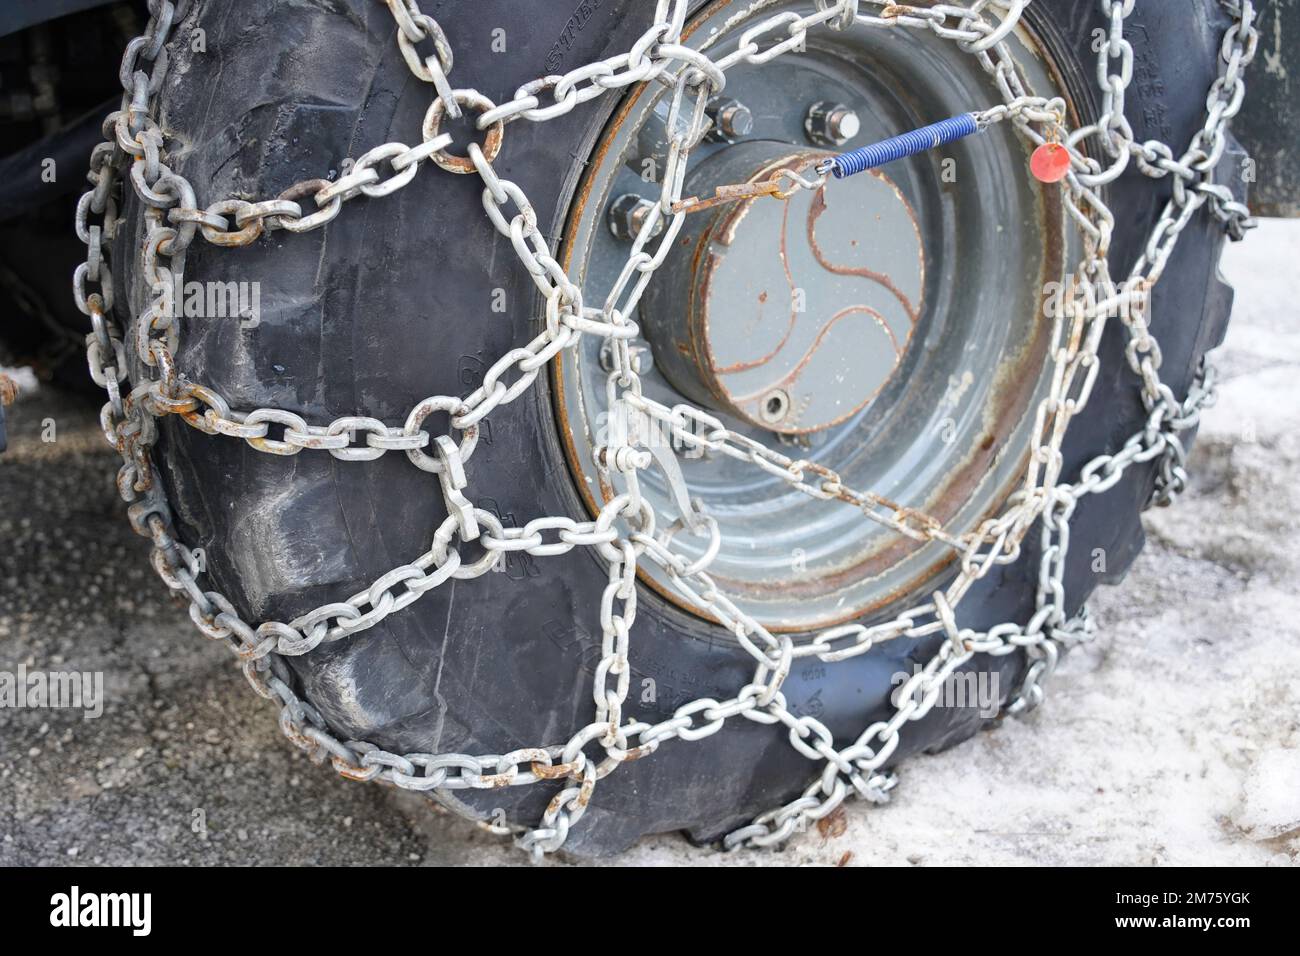 Seefeld, Austria - December 2022: Close up detail of large commercial vehicle equipped with snow chain, helps with tyre traction Stock Photo